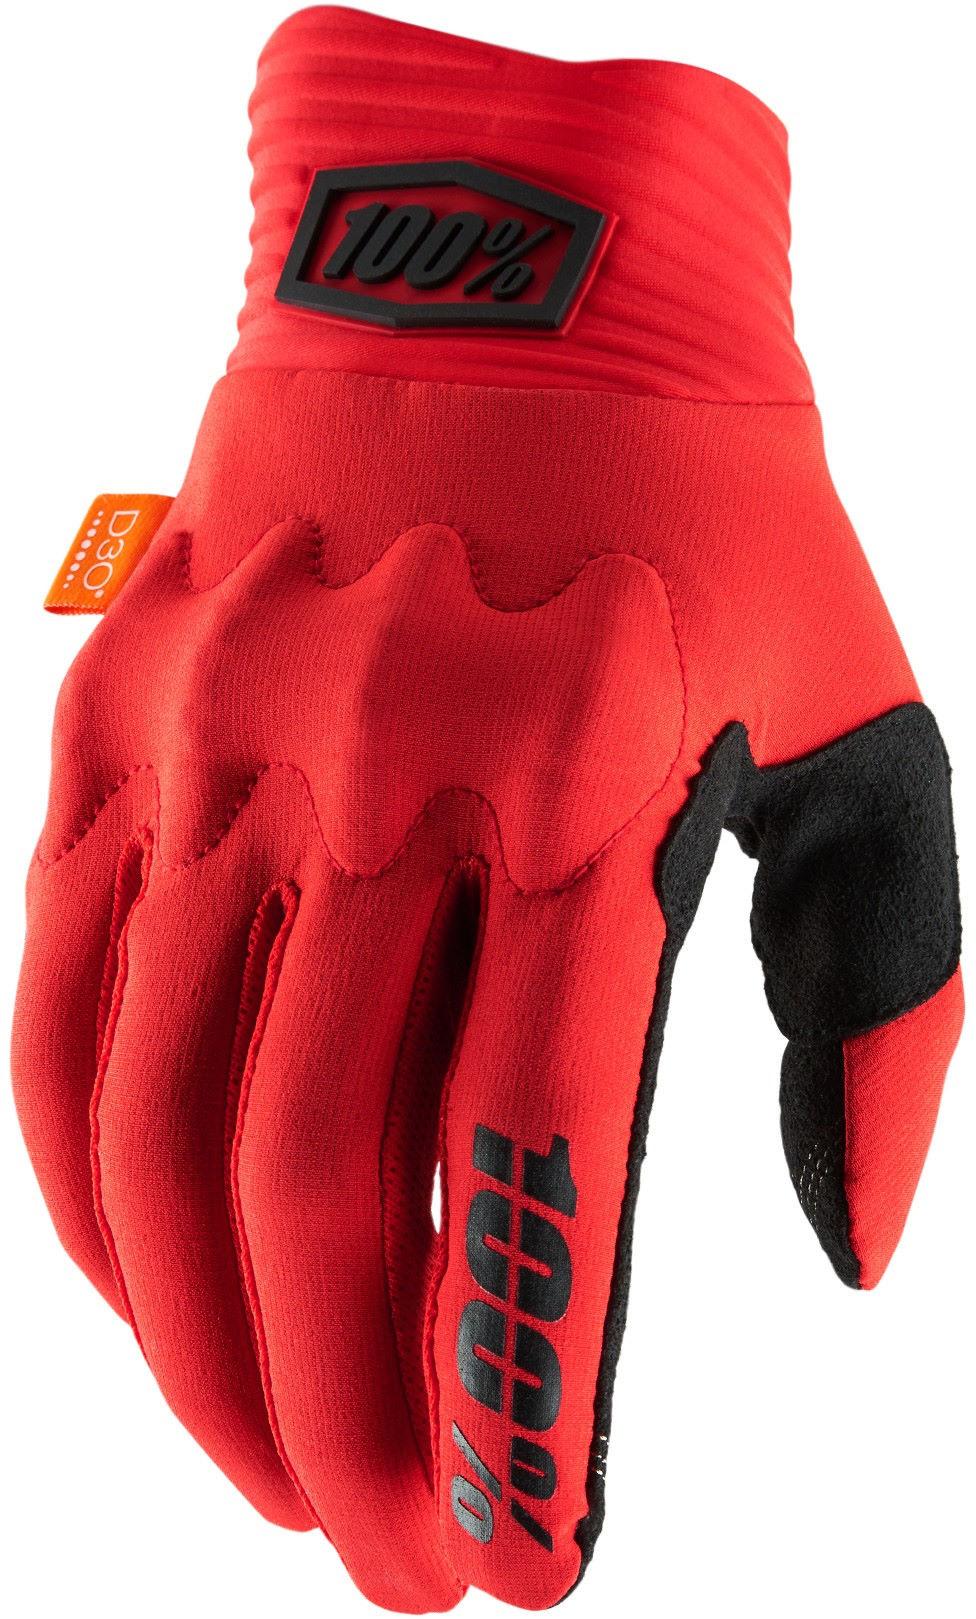 100% Cognito D30 Gloves  Red/black